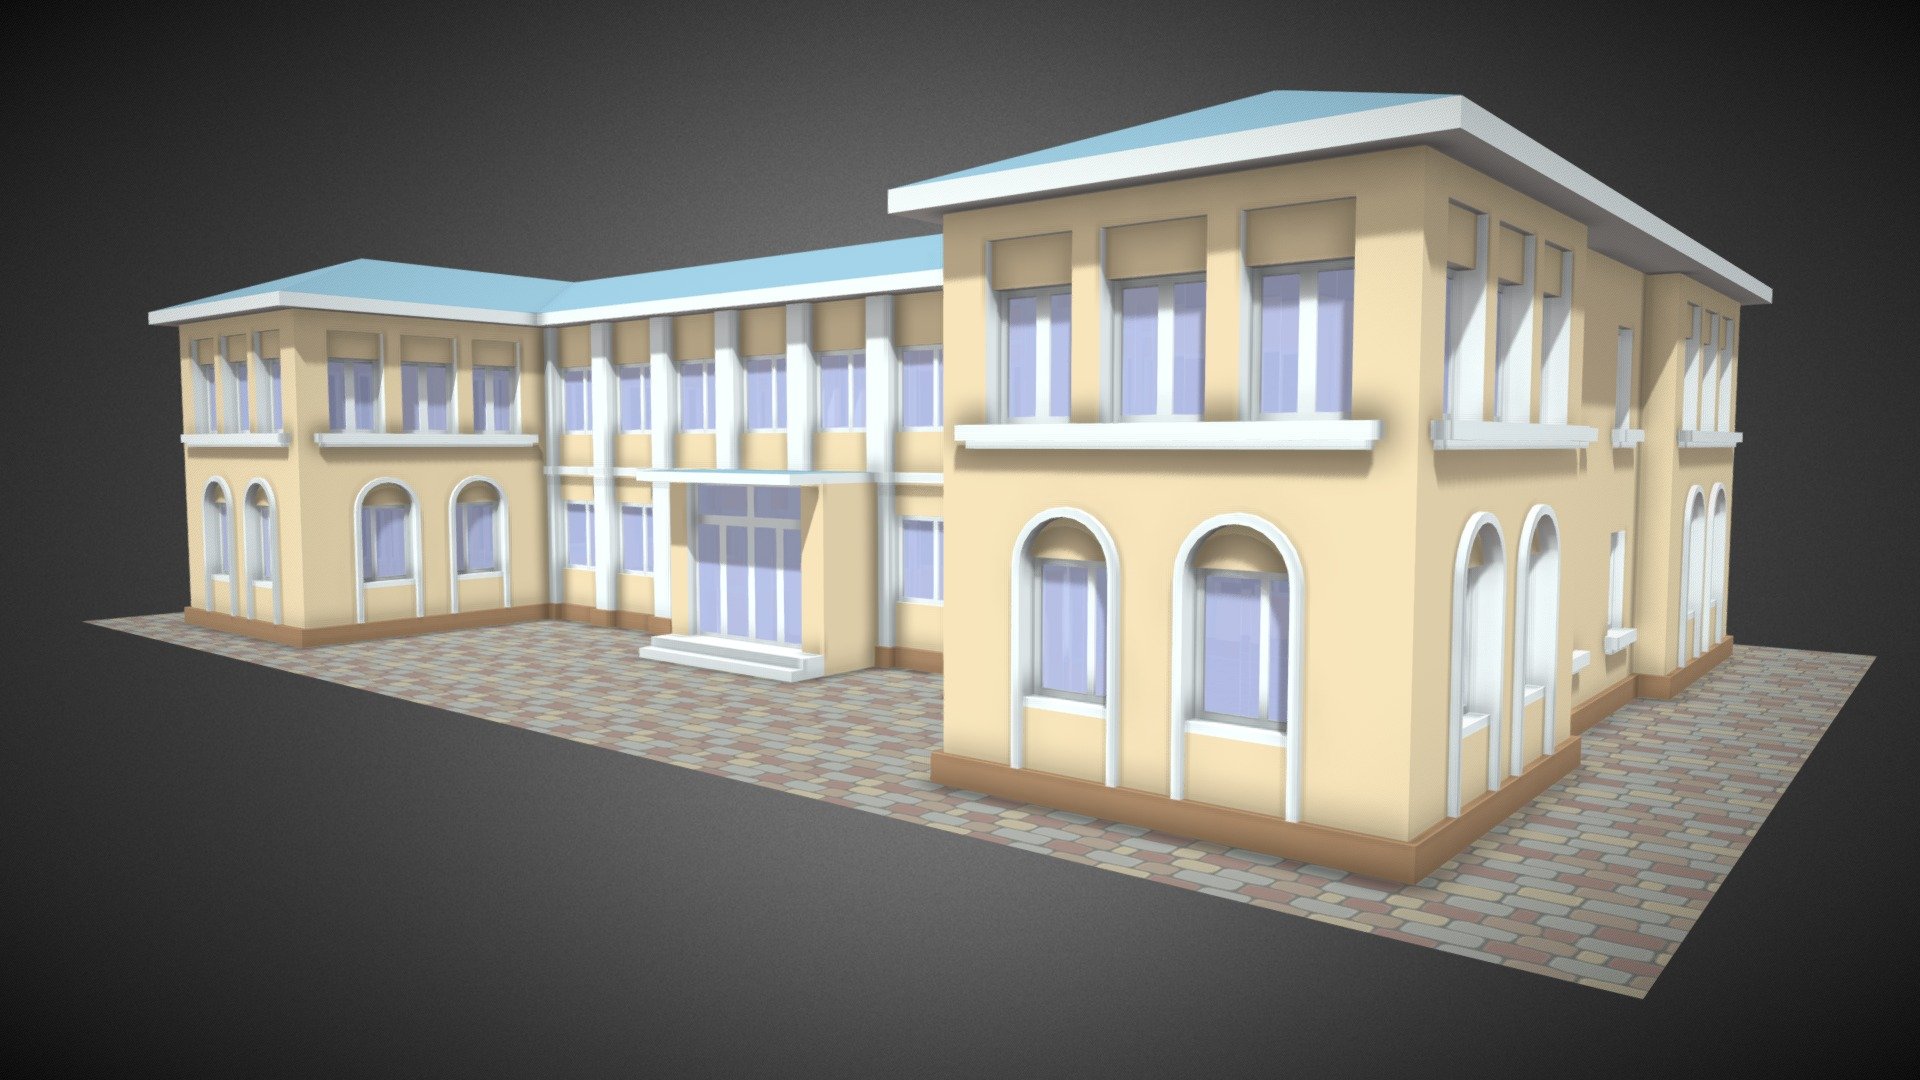 Big muncupal building, soviet era stylized. Can be used as Typegraphy or school. Lowpoly.
Made by @yellika optimized by @Moora and me.  Part of our Forest Riders driving simualtor game 3d model